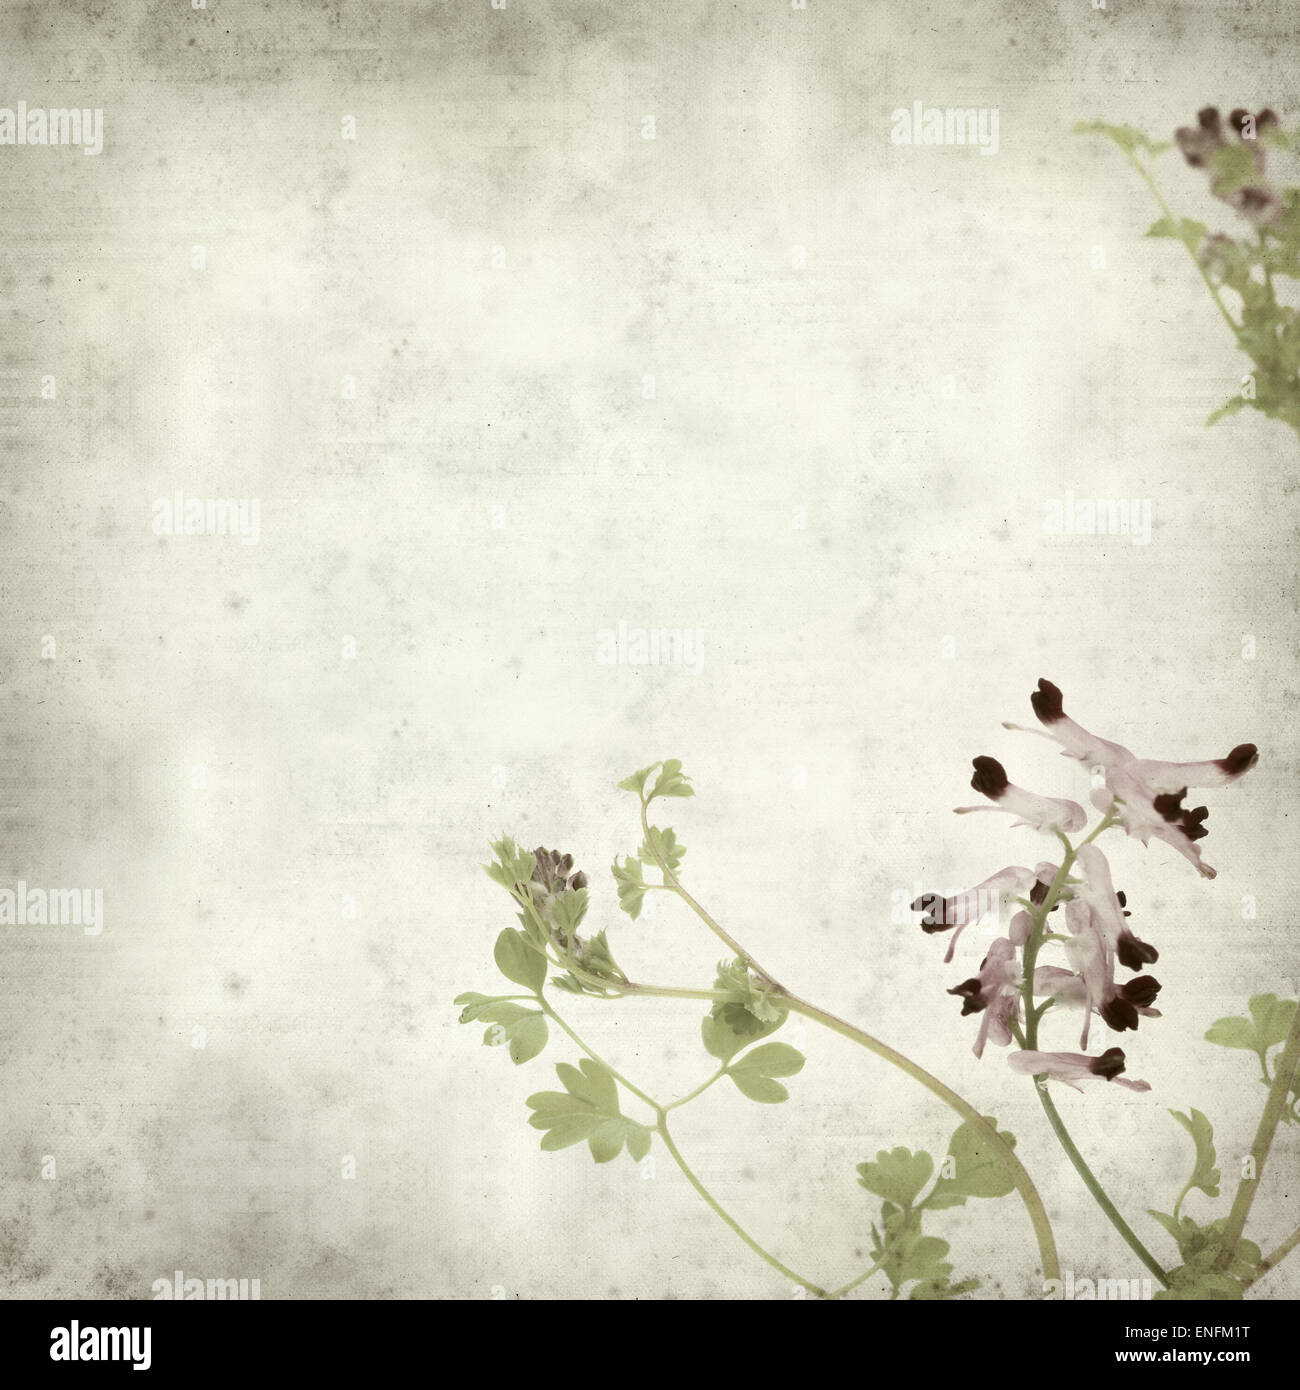 textured old paper background with flowering Fumaria plant Stock Photo